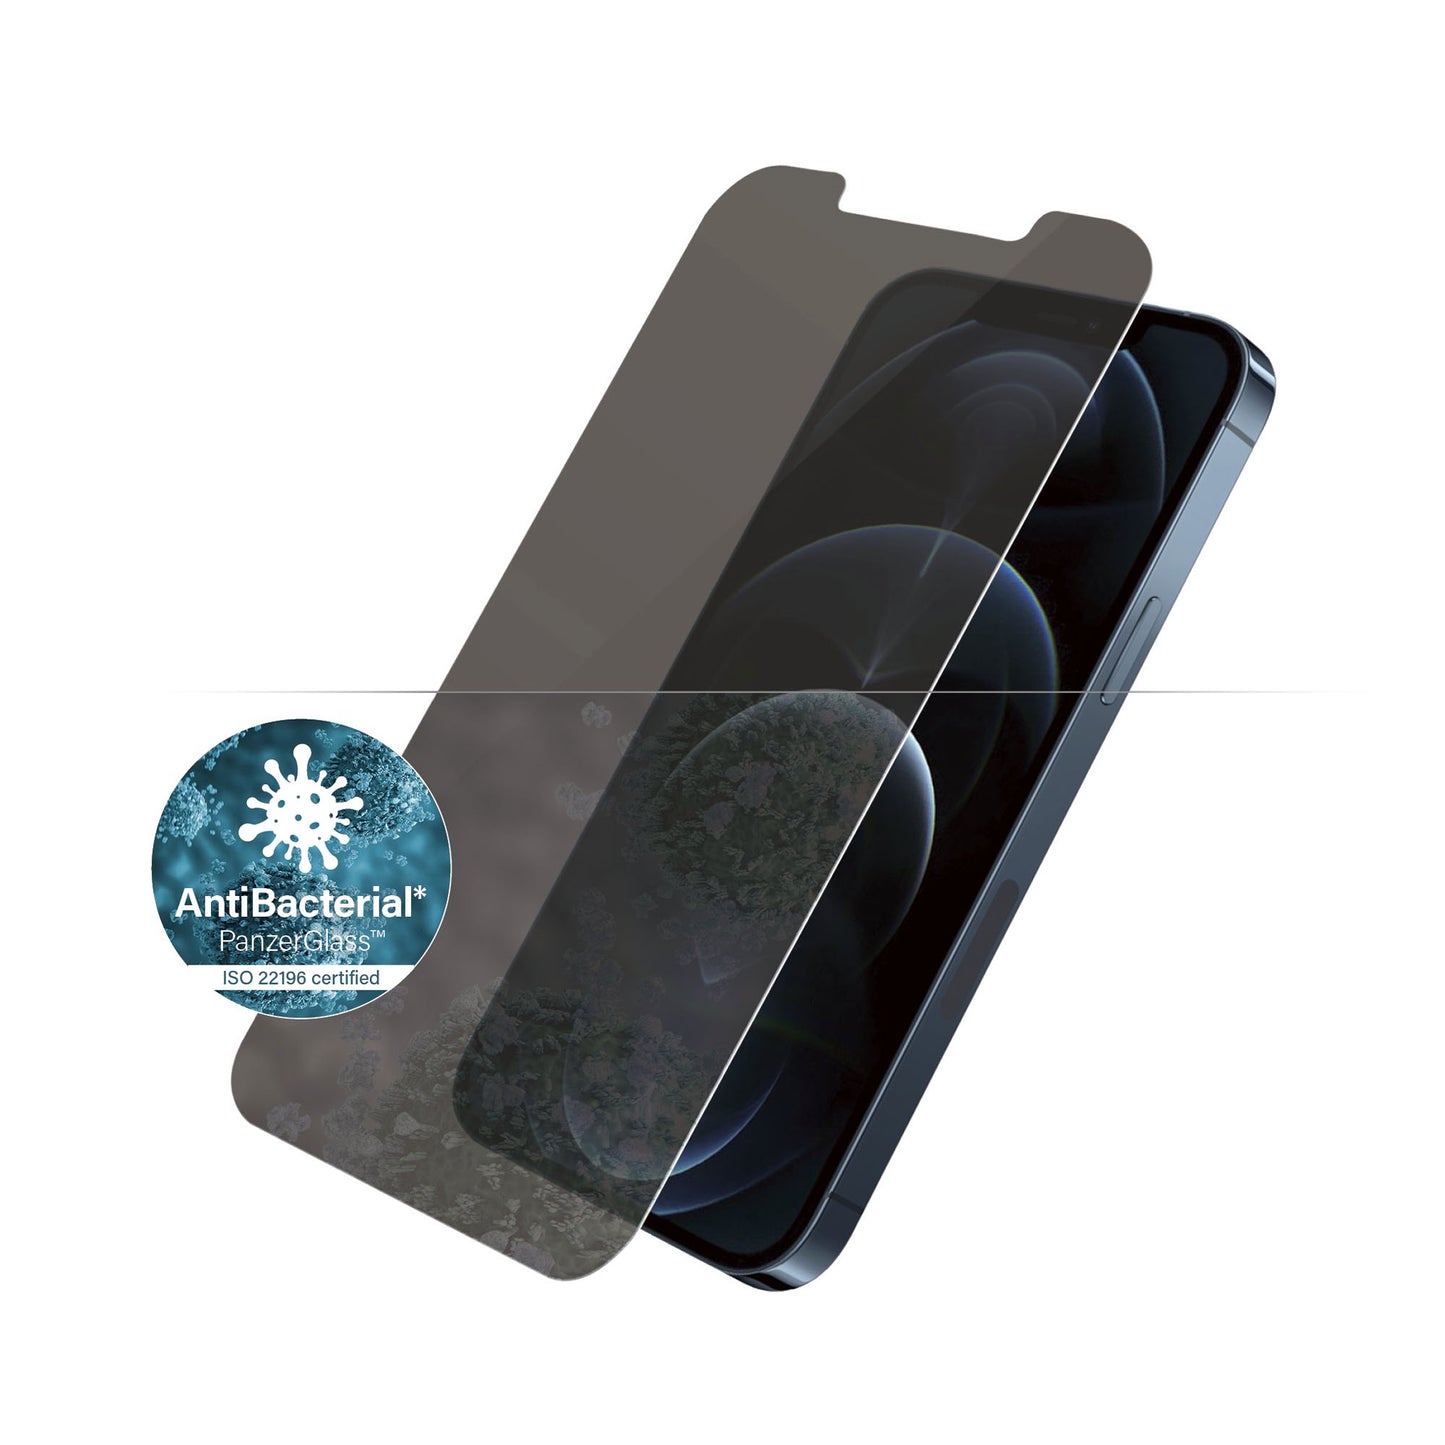 PANZERGLASS Standard Fit for iPhone 12 Pro Max - Privacy